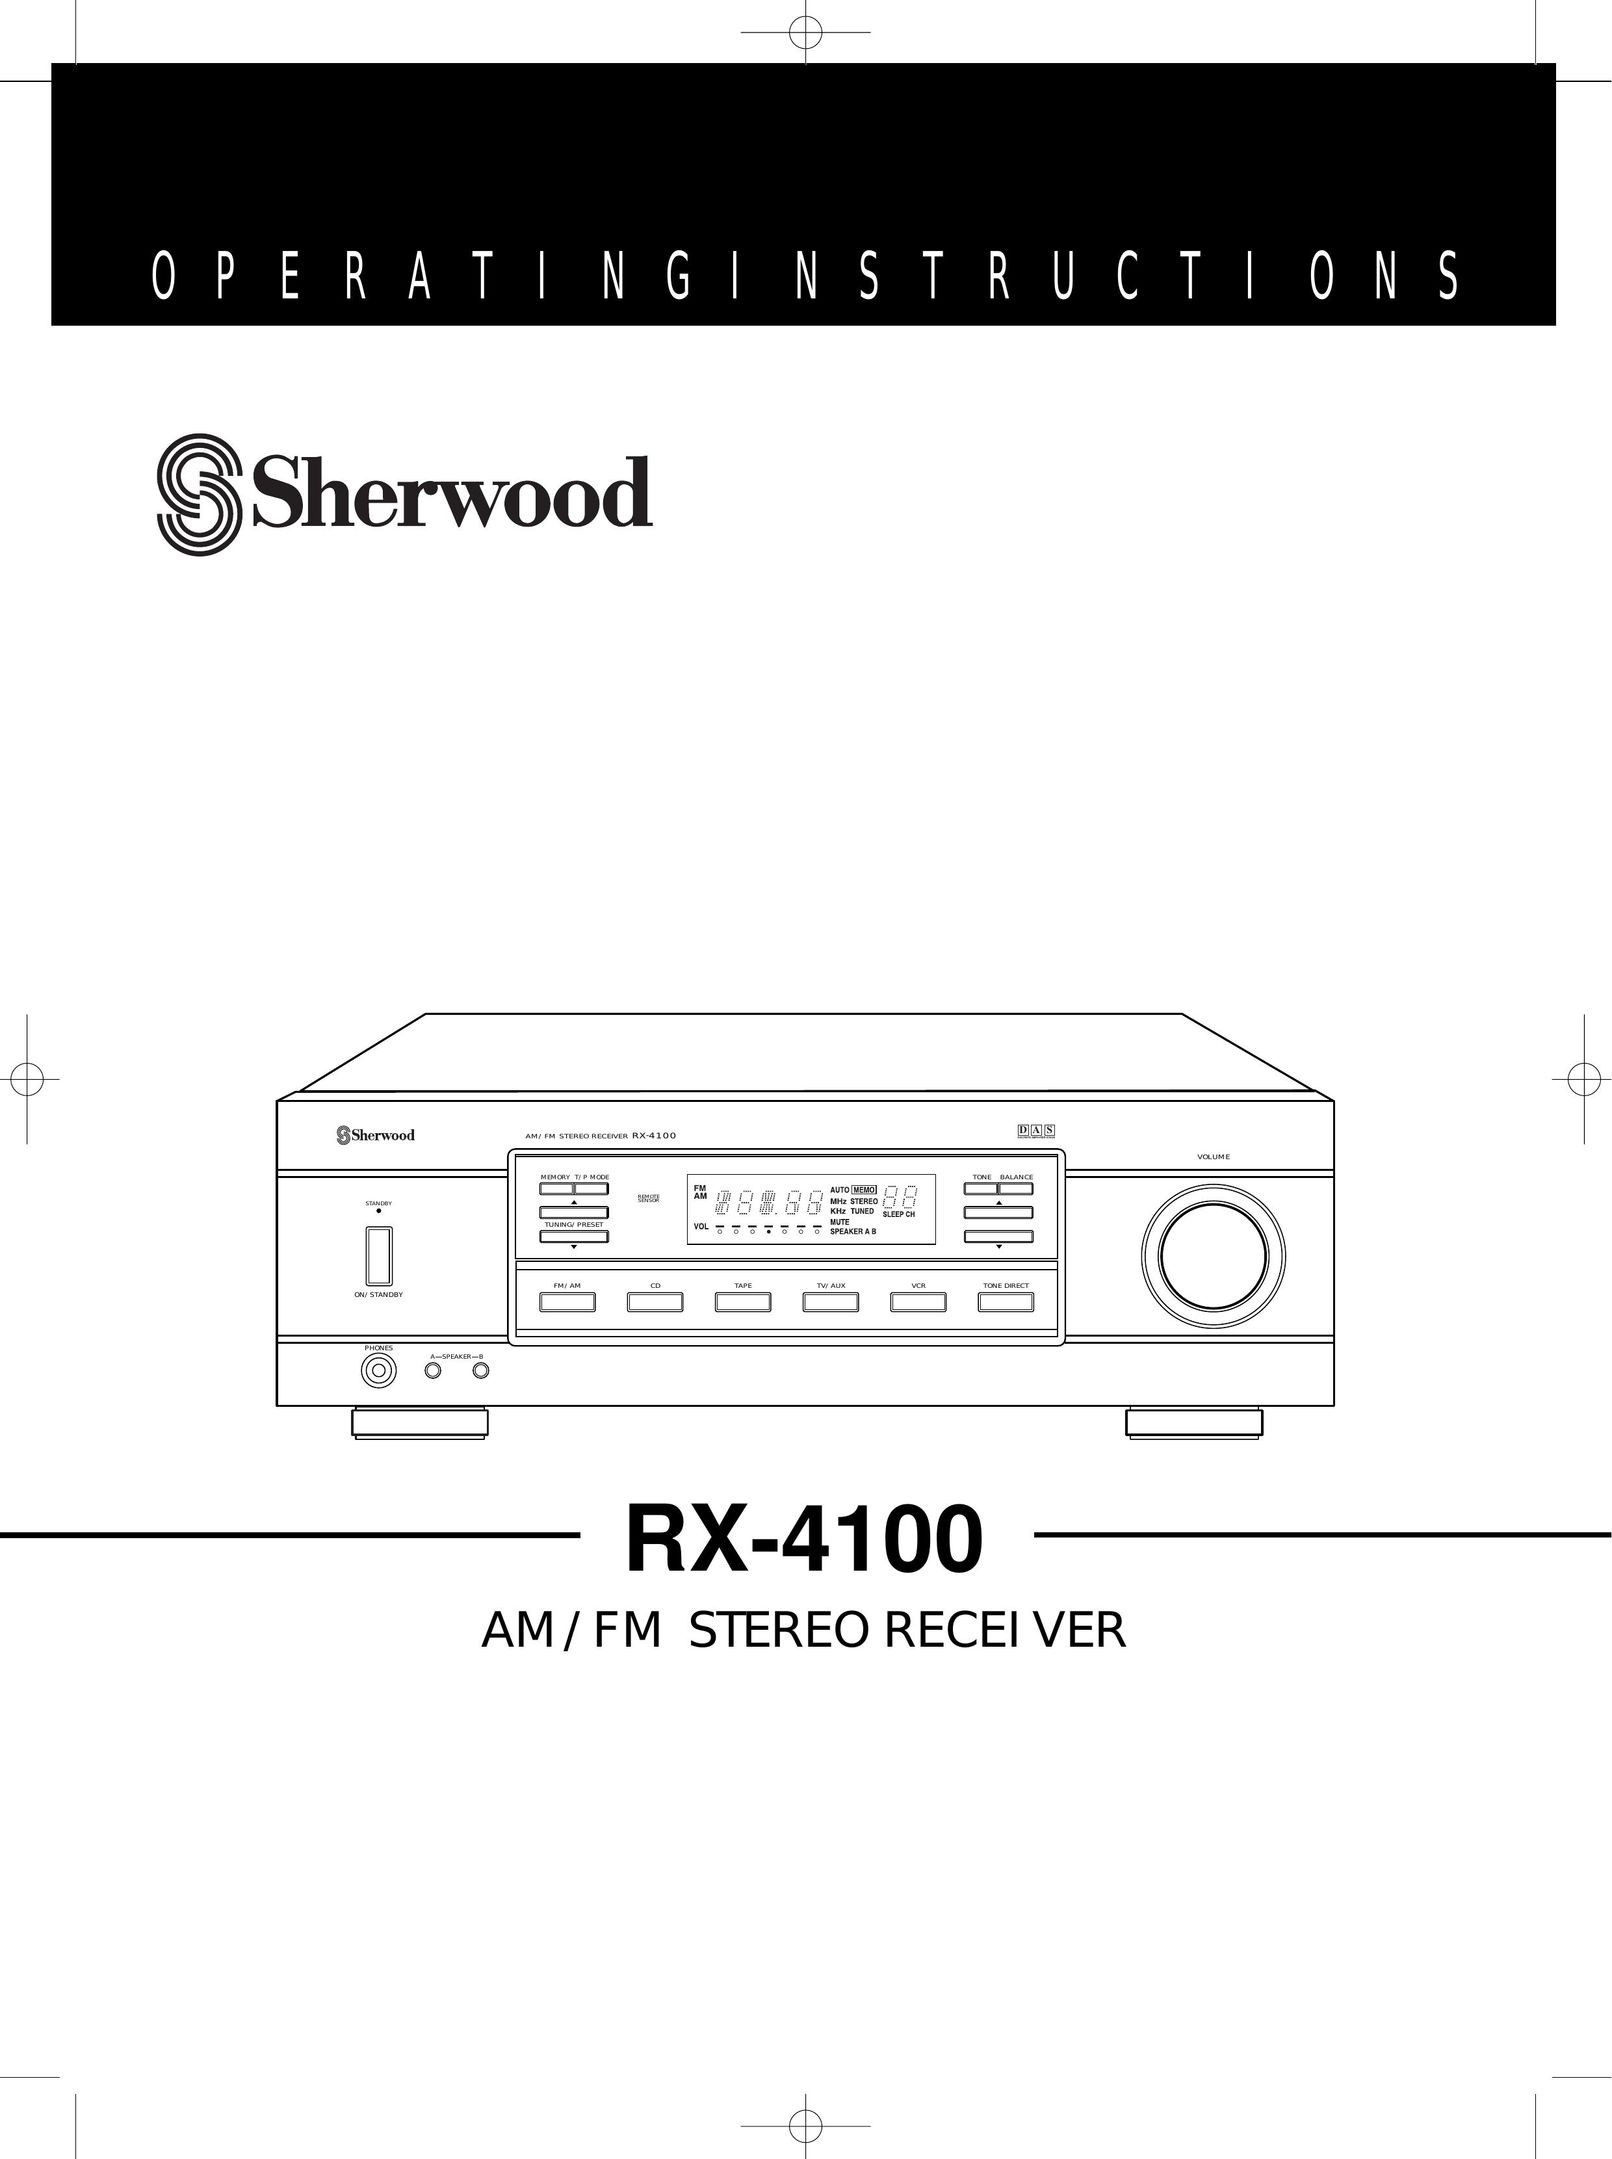 Sherwood RX-4100 Stereo System User Manual